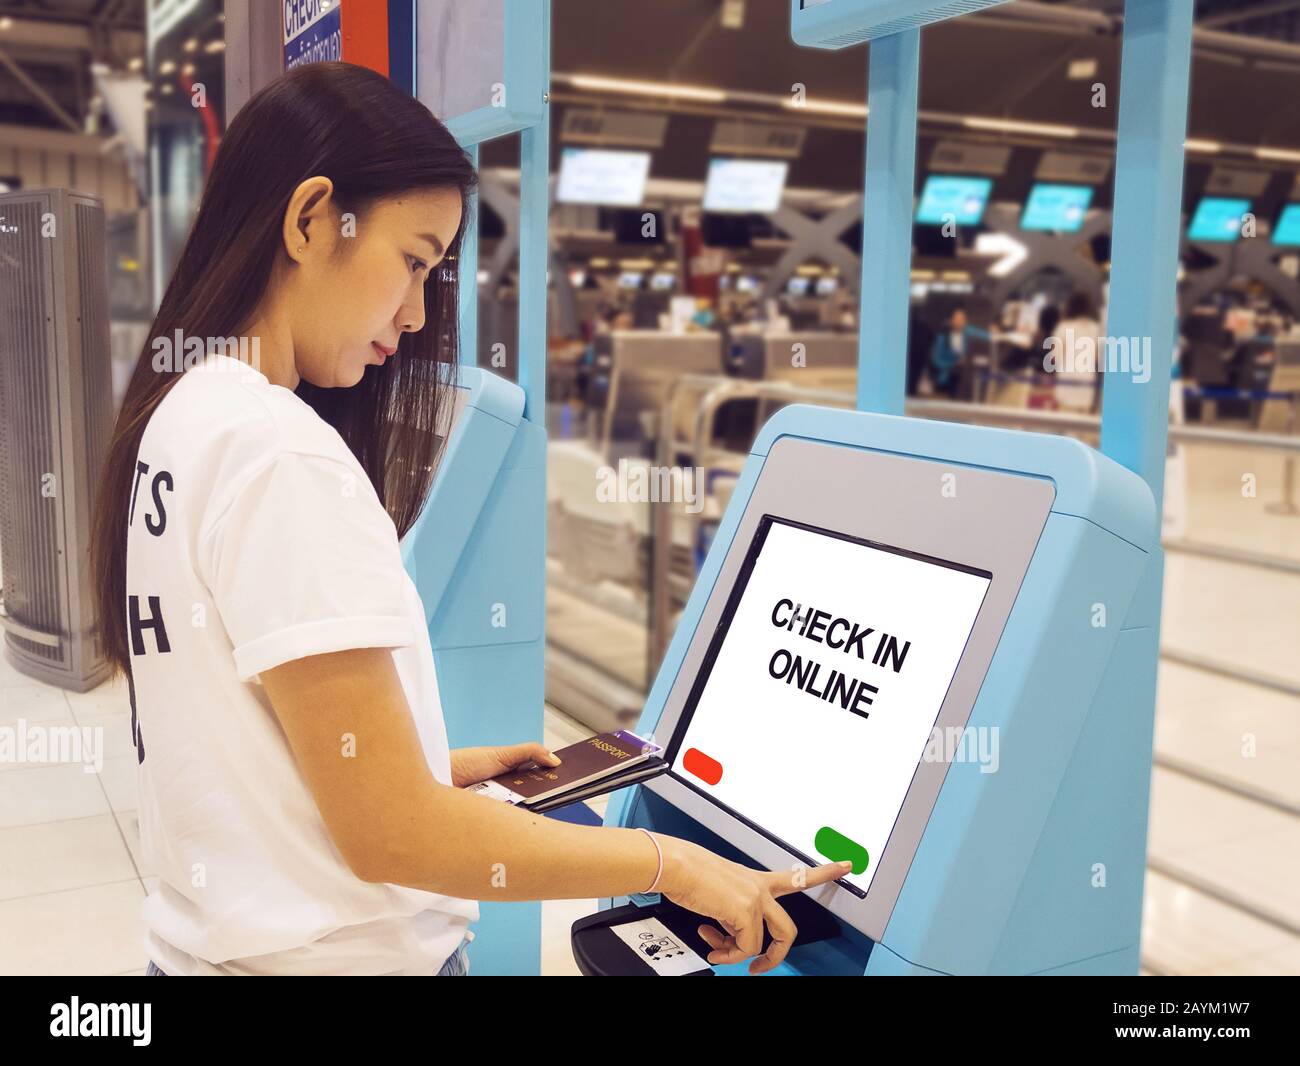 young Asian woman with passport using self check-in kiosk touch screen interactive display in airport, doing self check-in for flight or buying airpla Stock Photo